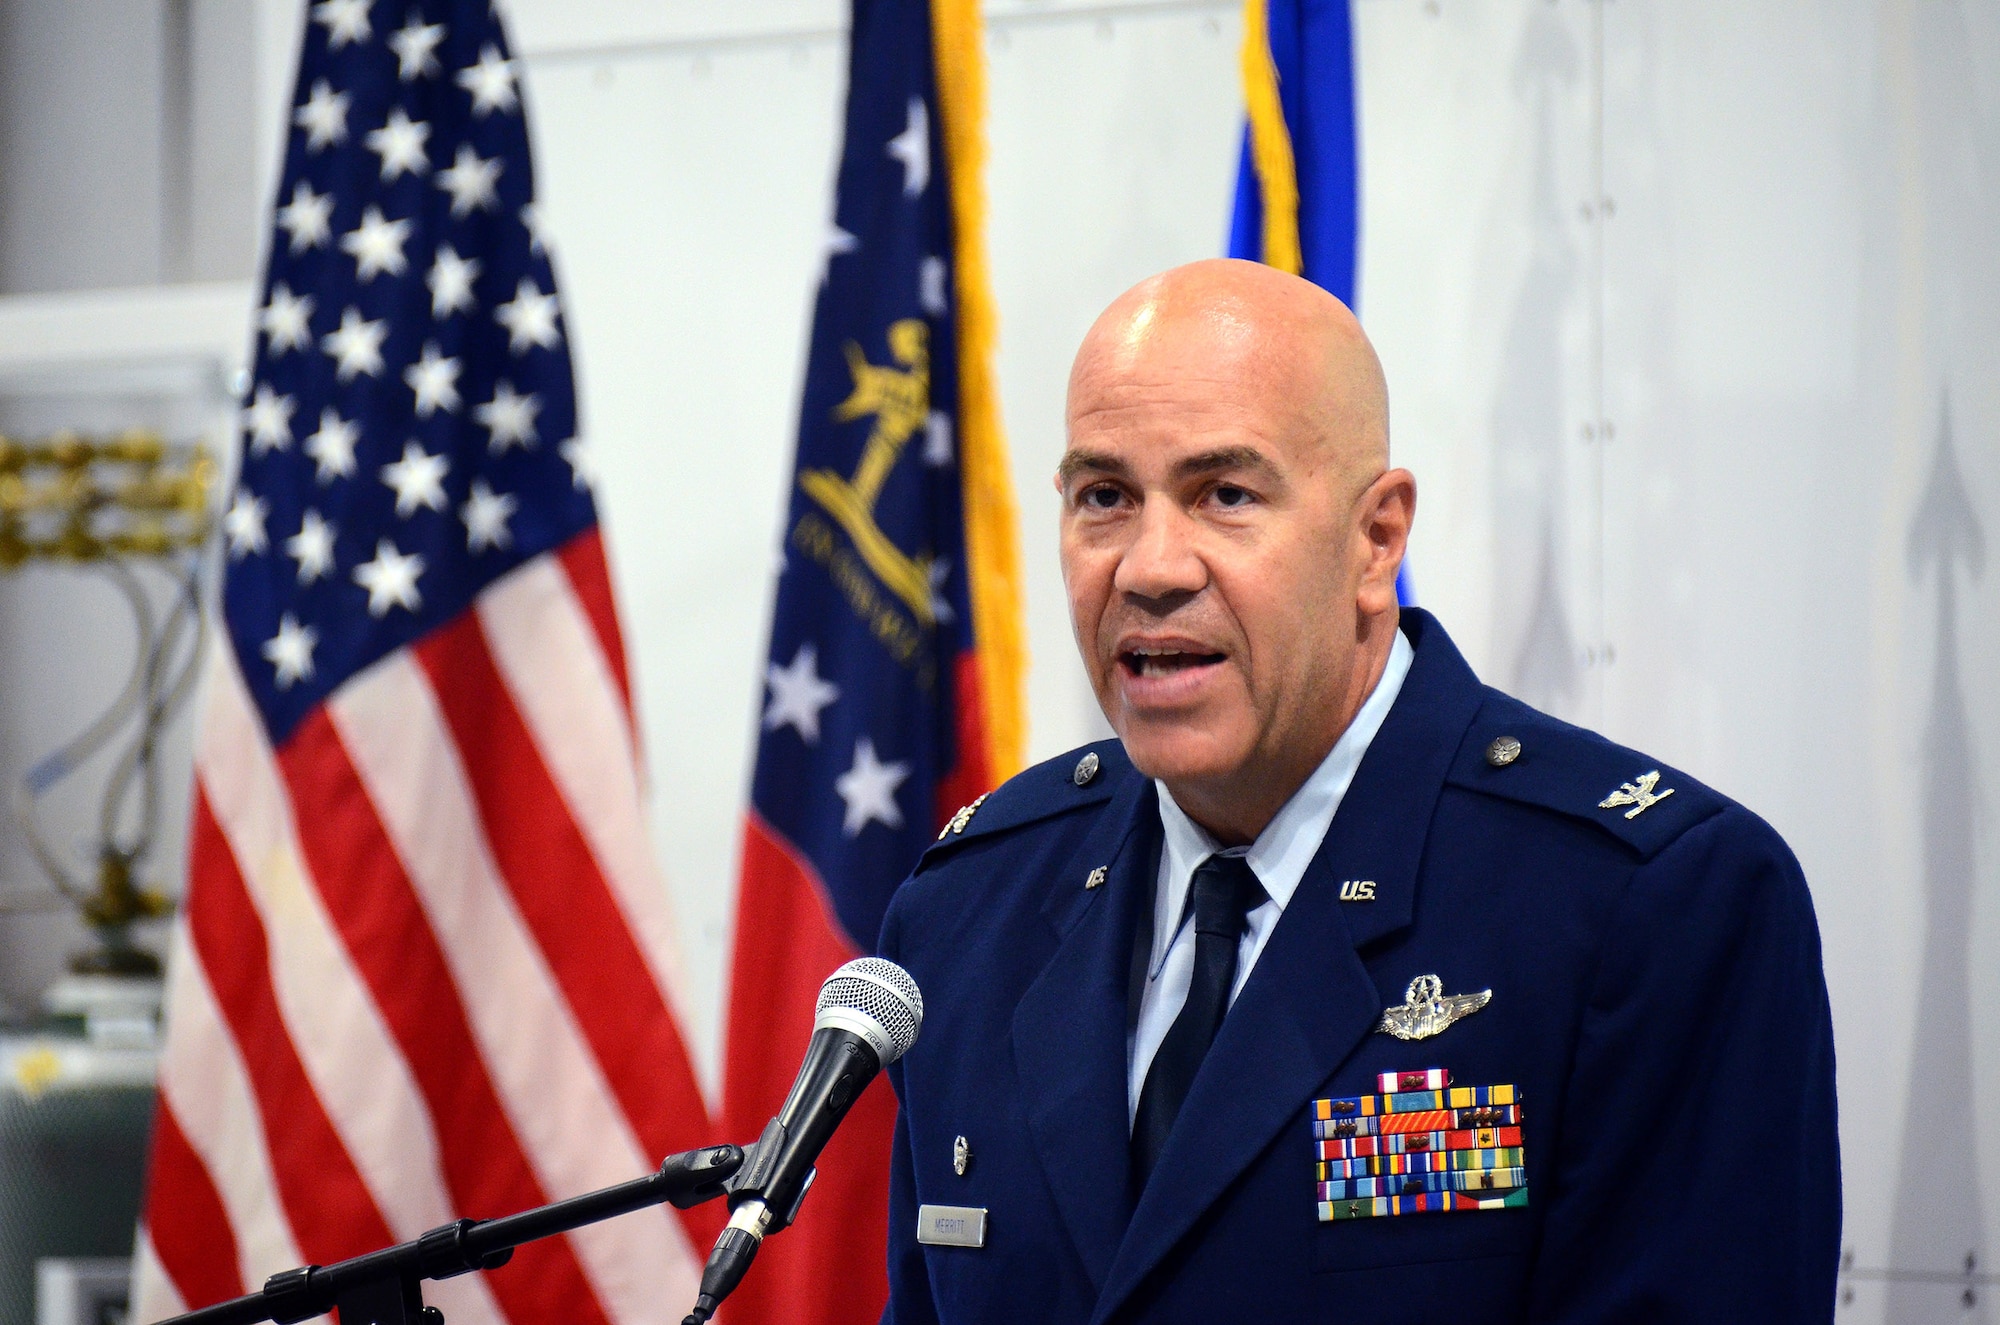 Col. Brent Merritt, 94th Airlift Wing commander, makes opening remarks at the unveiling of the US State Department-sponsored Containerized Biocontainment System units at Dobbins Air Reserve Base, Ga., Aug. 11, 2015. The two Containerized Biocontainment units built by MRIGlobal through a partnership with the U.S. State Dept. and the Paul G. Allen Ebola Program, will be positioned at Dobbins ARB, ready for future. (U.S. Air Force photo/ Brad Fallin)